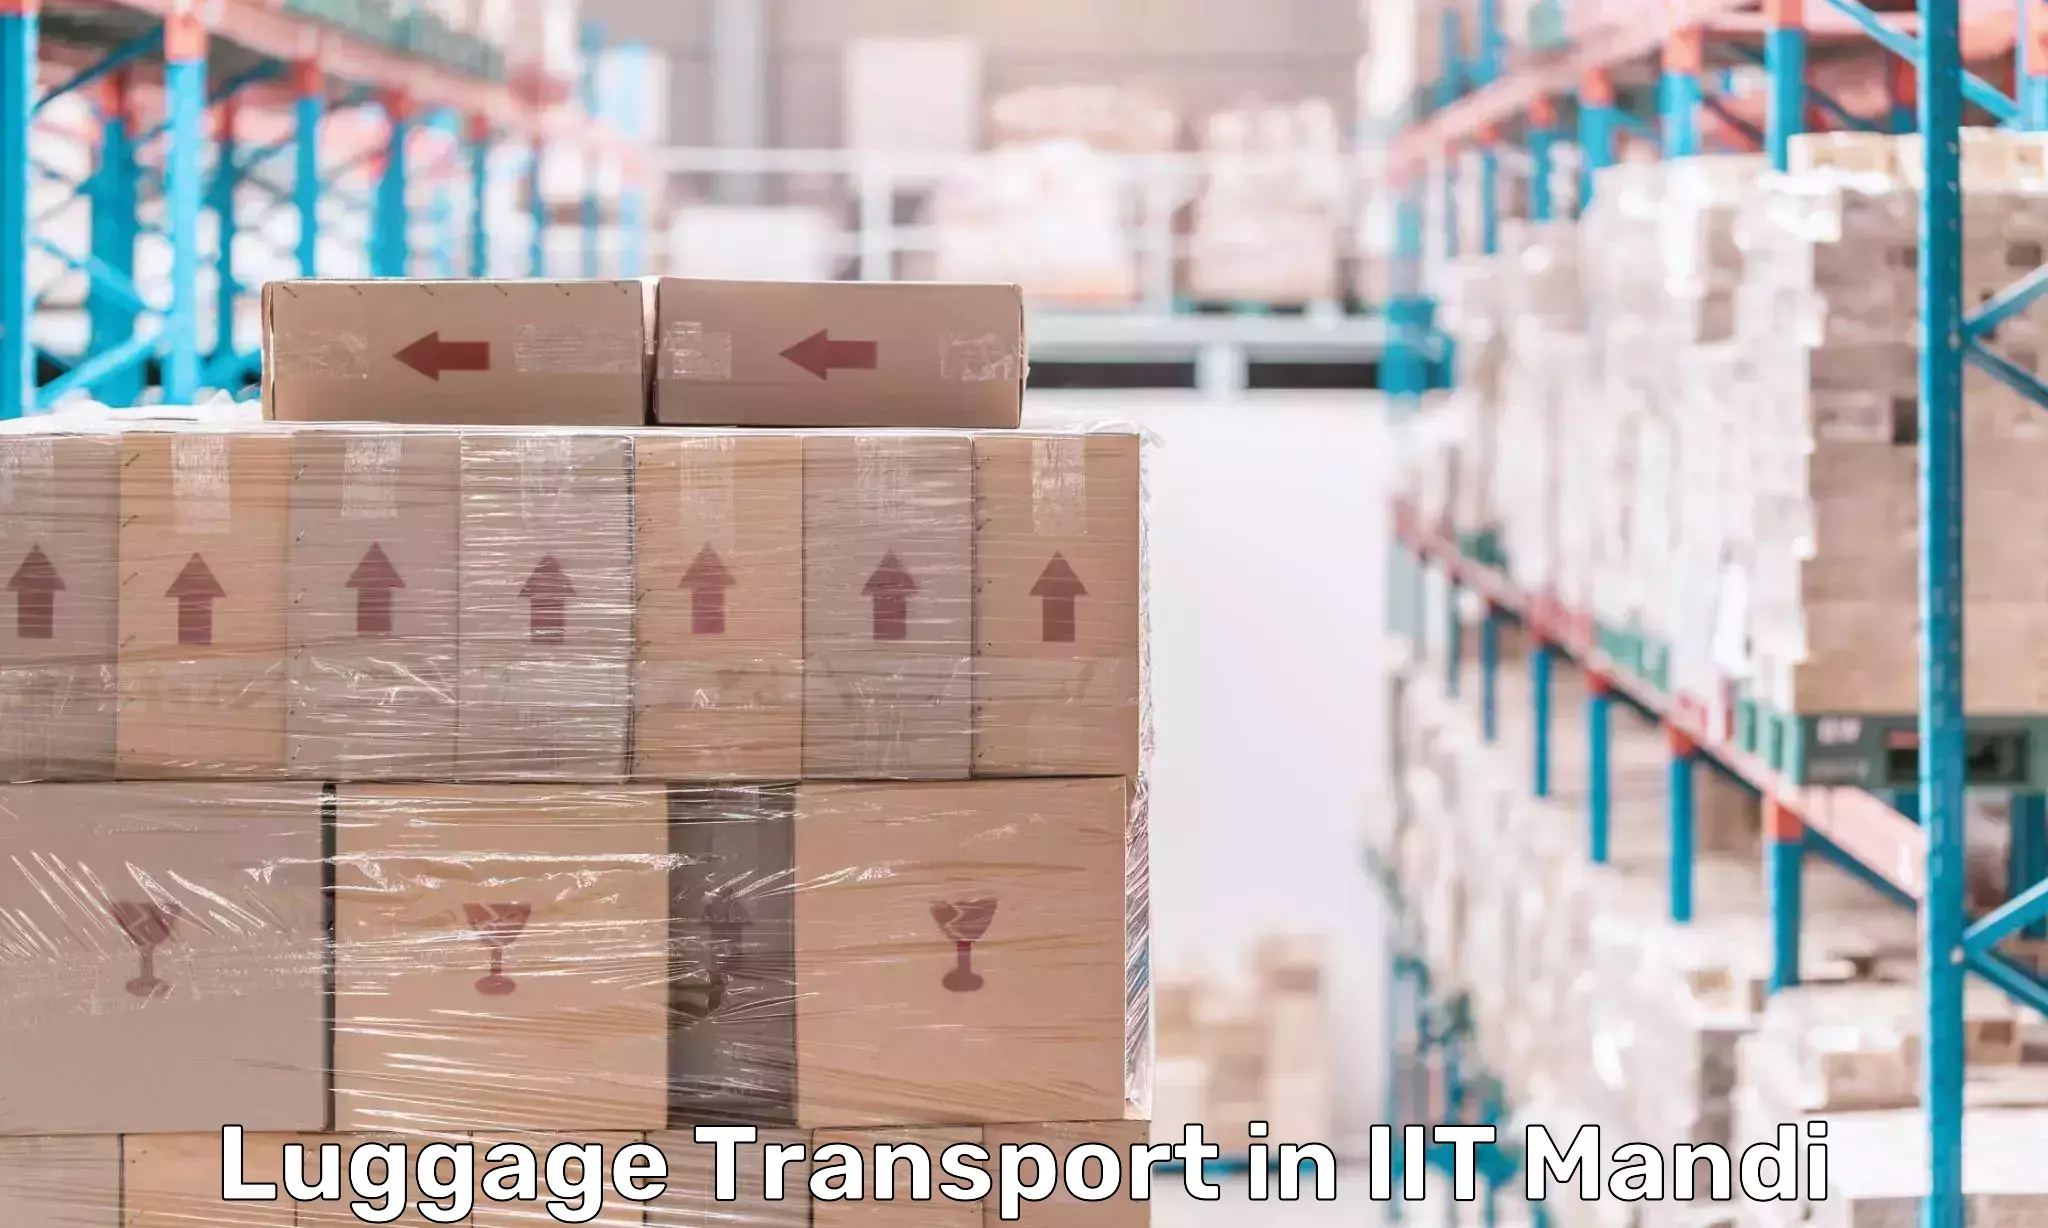 Luggage delivery network in IIT Mandi